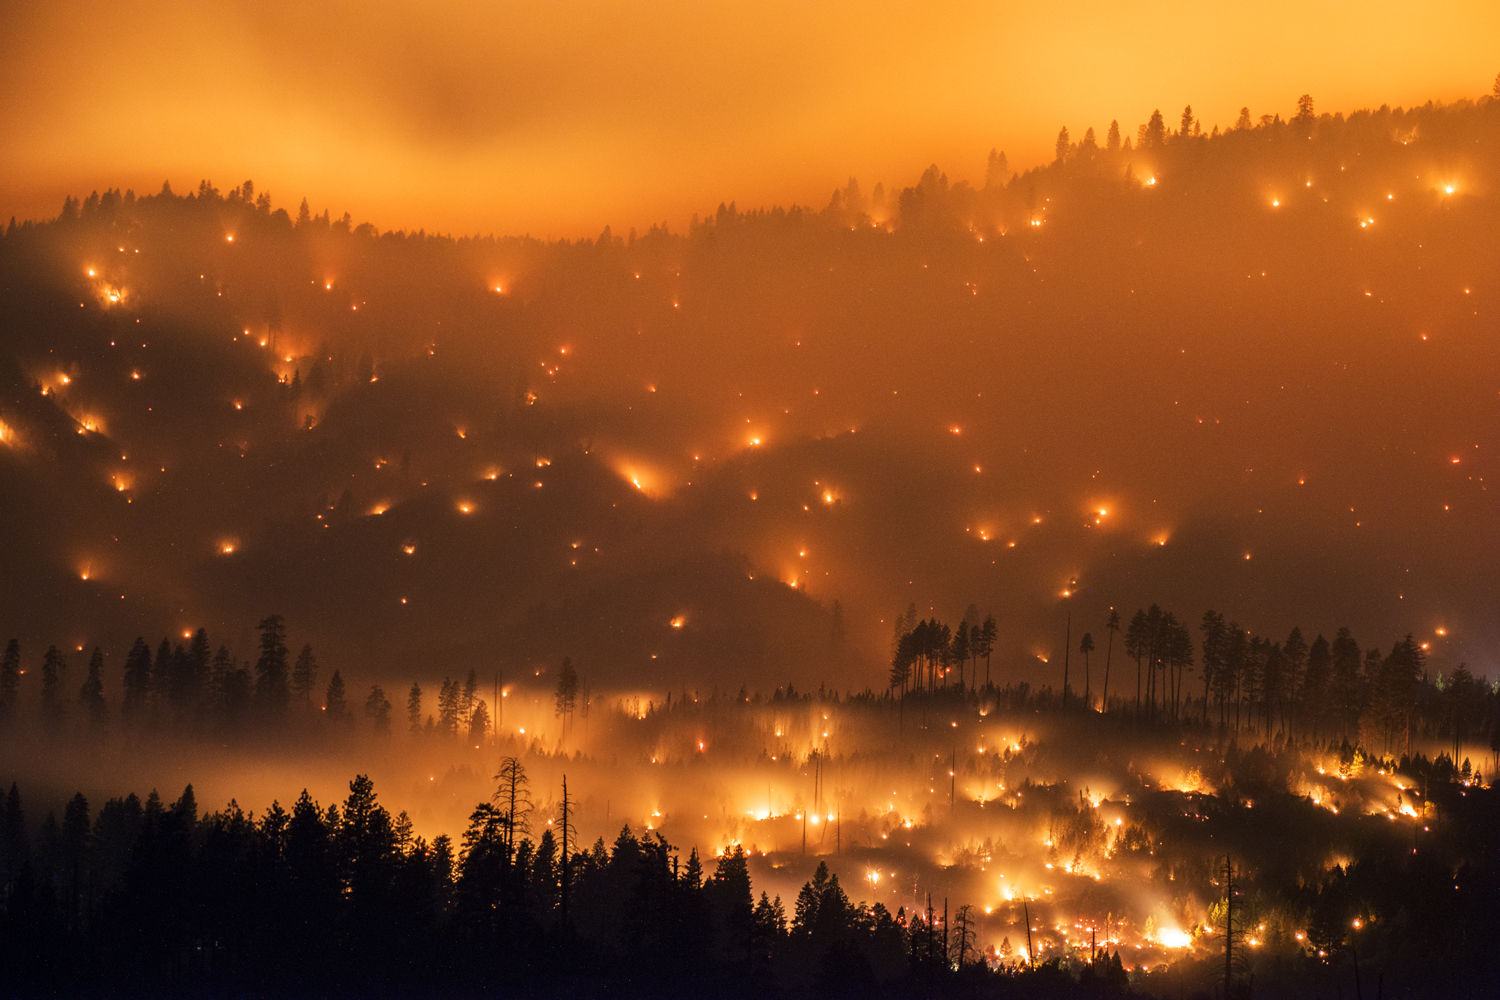 The El Portal Fire burns on a hillside in the Stanislaus National Forest and Yosemite National Park, July 27, 2014.